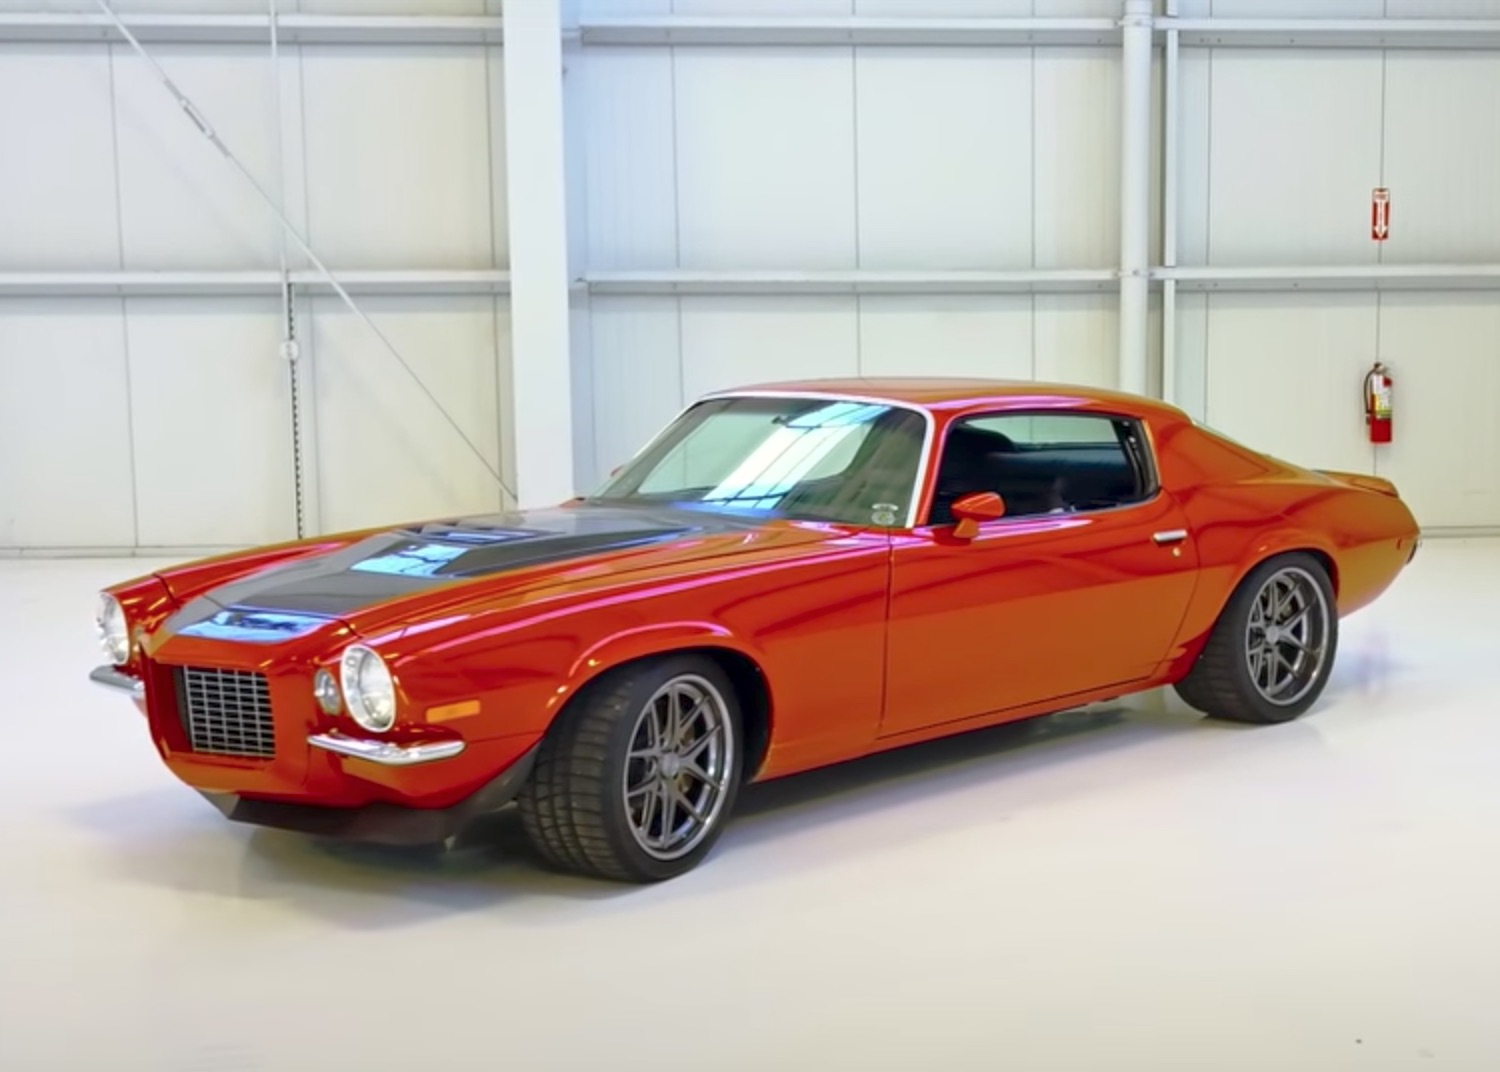 pro-tourer that just wasn't up to snuff. mike musto reviews 1970 camar...